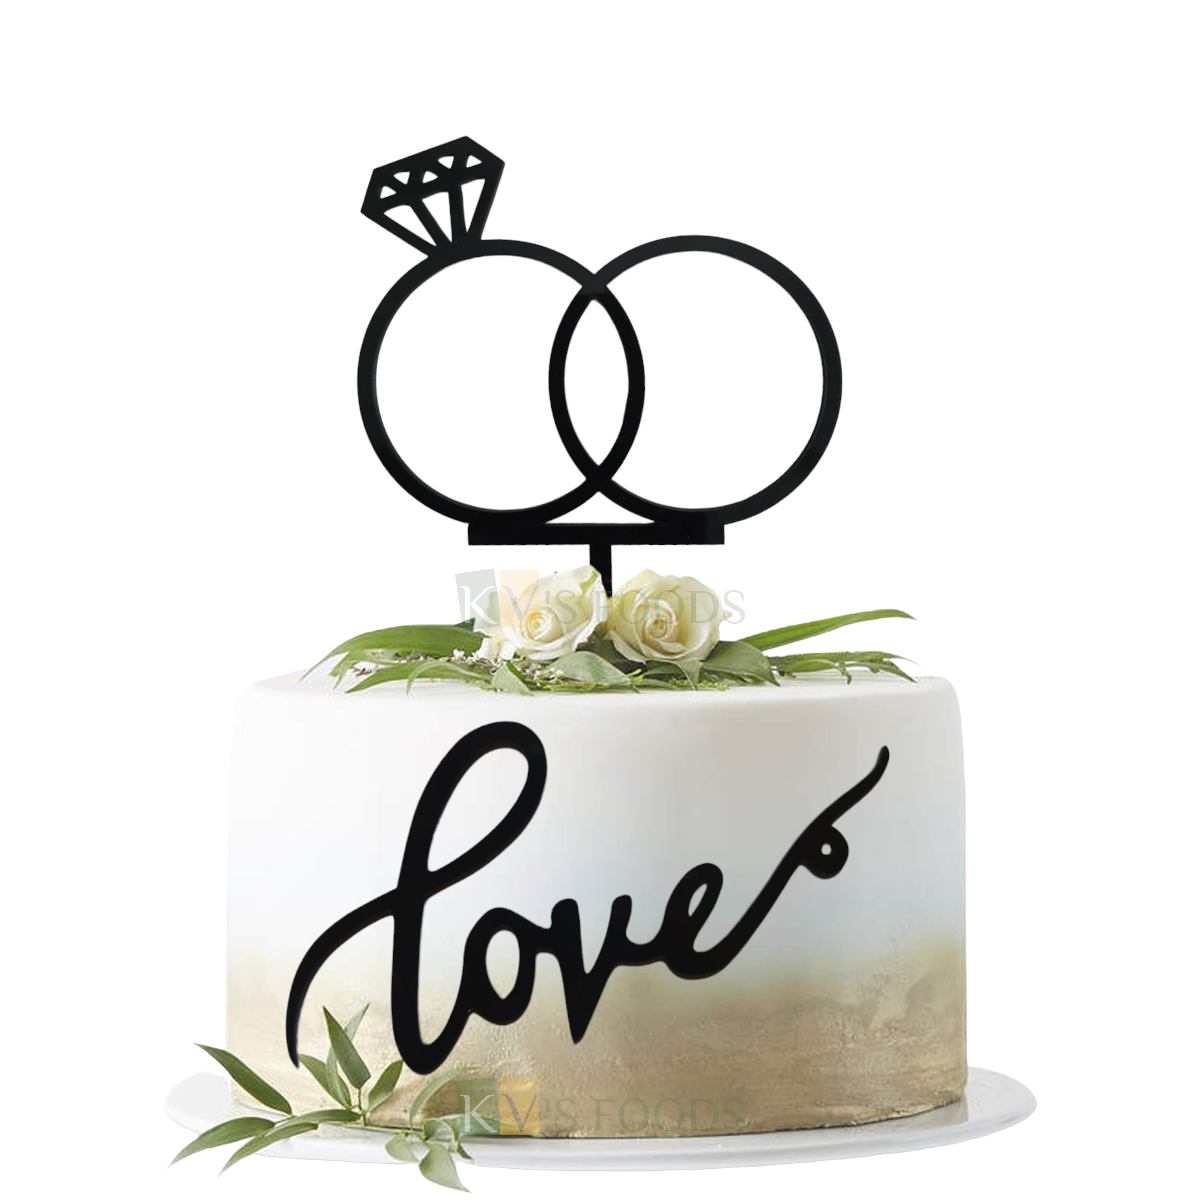 1PC Black Ring With Stick and Love Without Stick Cake Topper, Engagement  Wedding Cake Topper, Silhouette